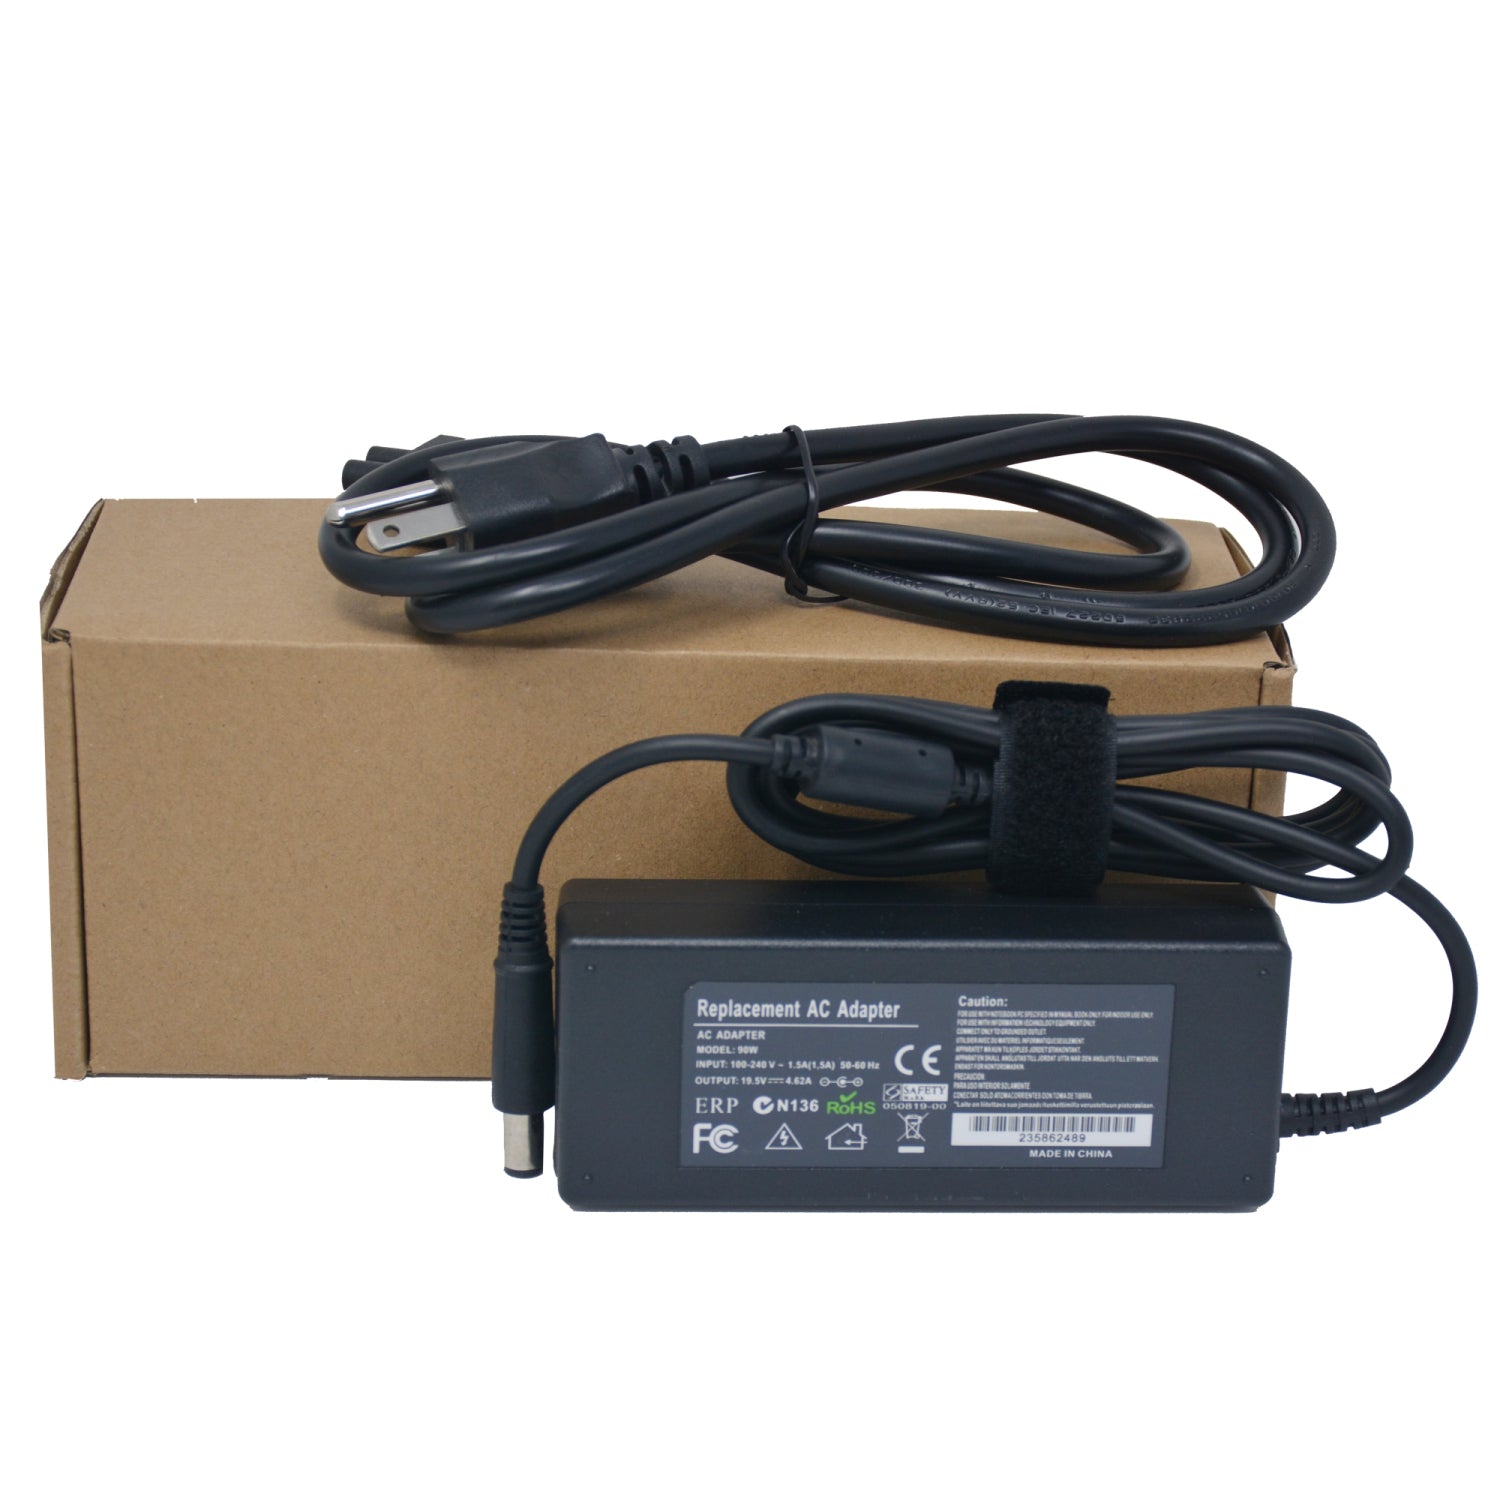 New Replacement laptop AC Adapter for HP 90W 19V/4.74A AC Power Adapter Laptop Charger Compatible with HP Notebooks/tablets with 4.5mm connector